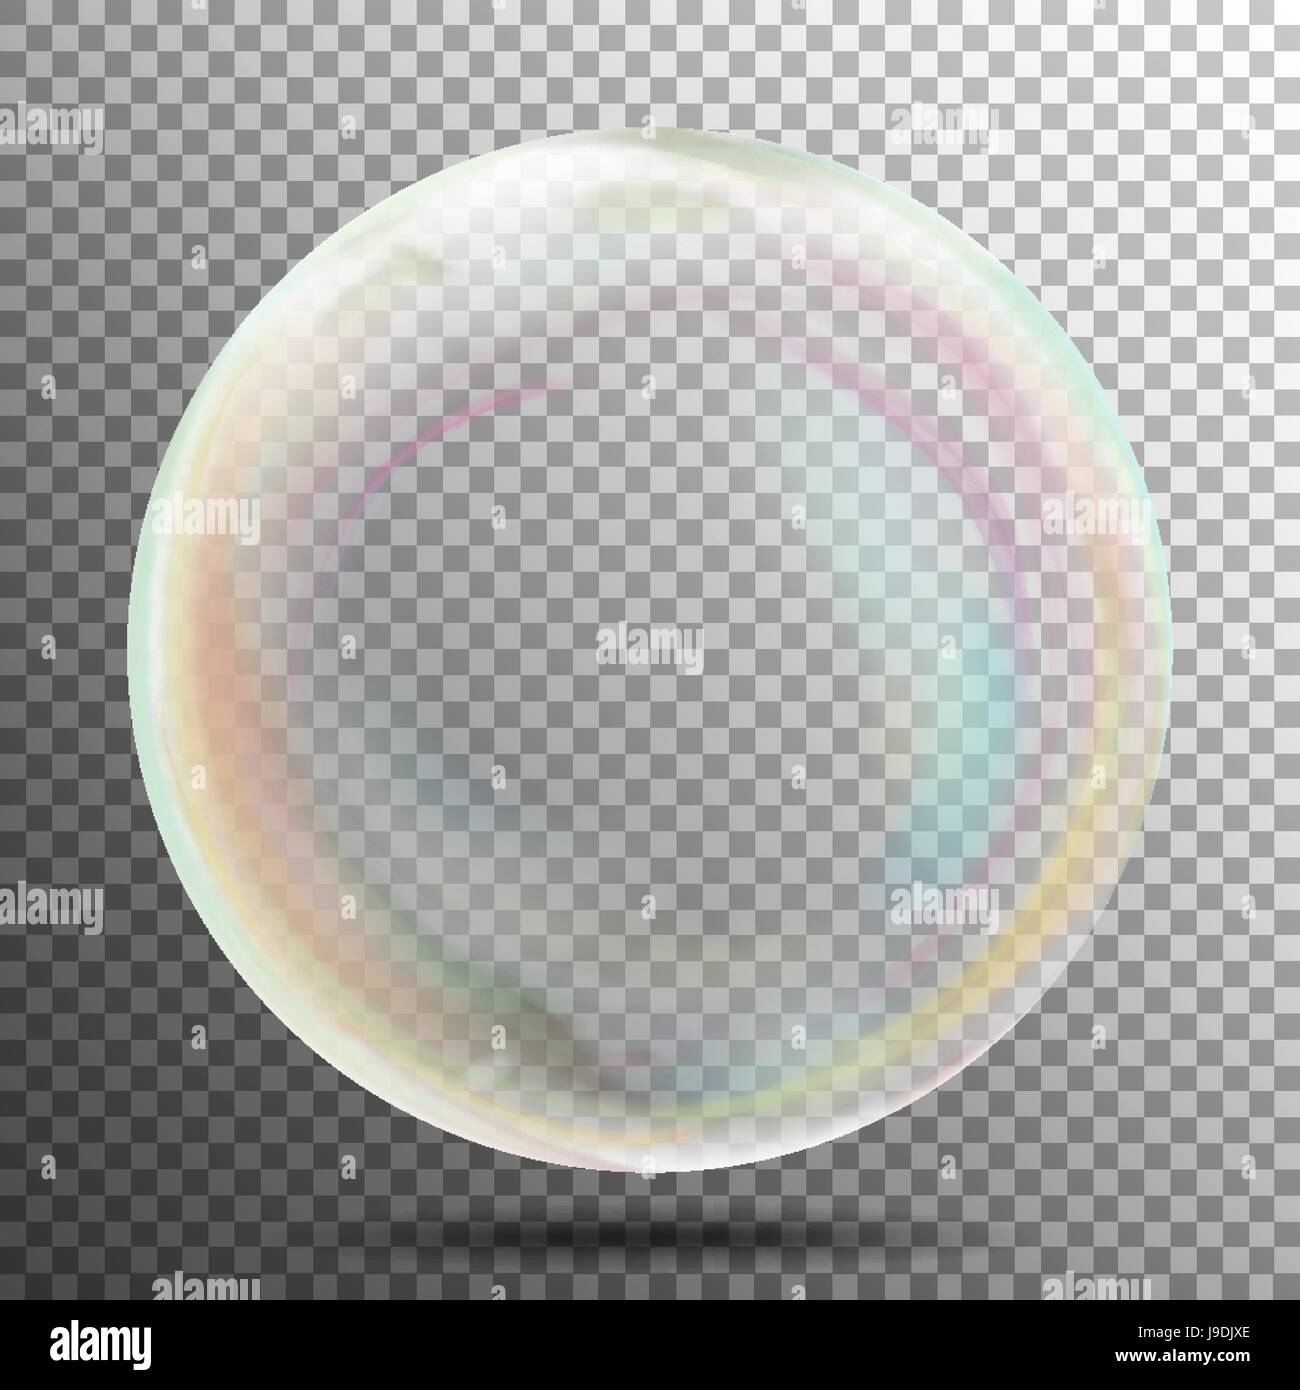 Air Bubble. Glow White Transparent Bubble With Light Transparent Shadow And Reflection, Shiny Sphere. Vector Illustration Stock Vector